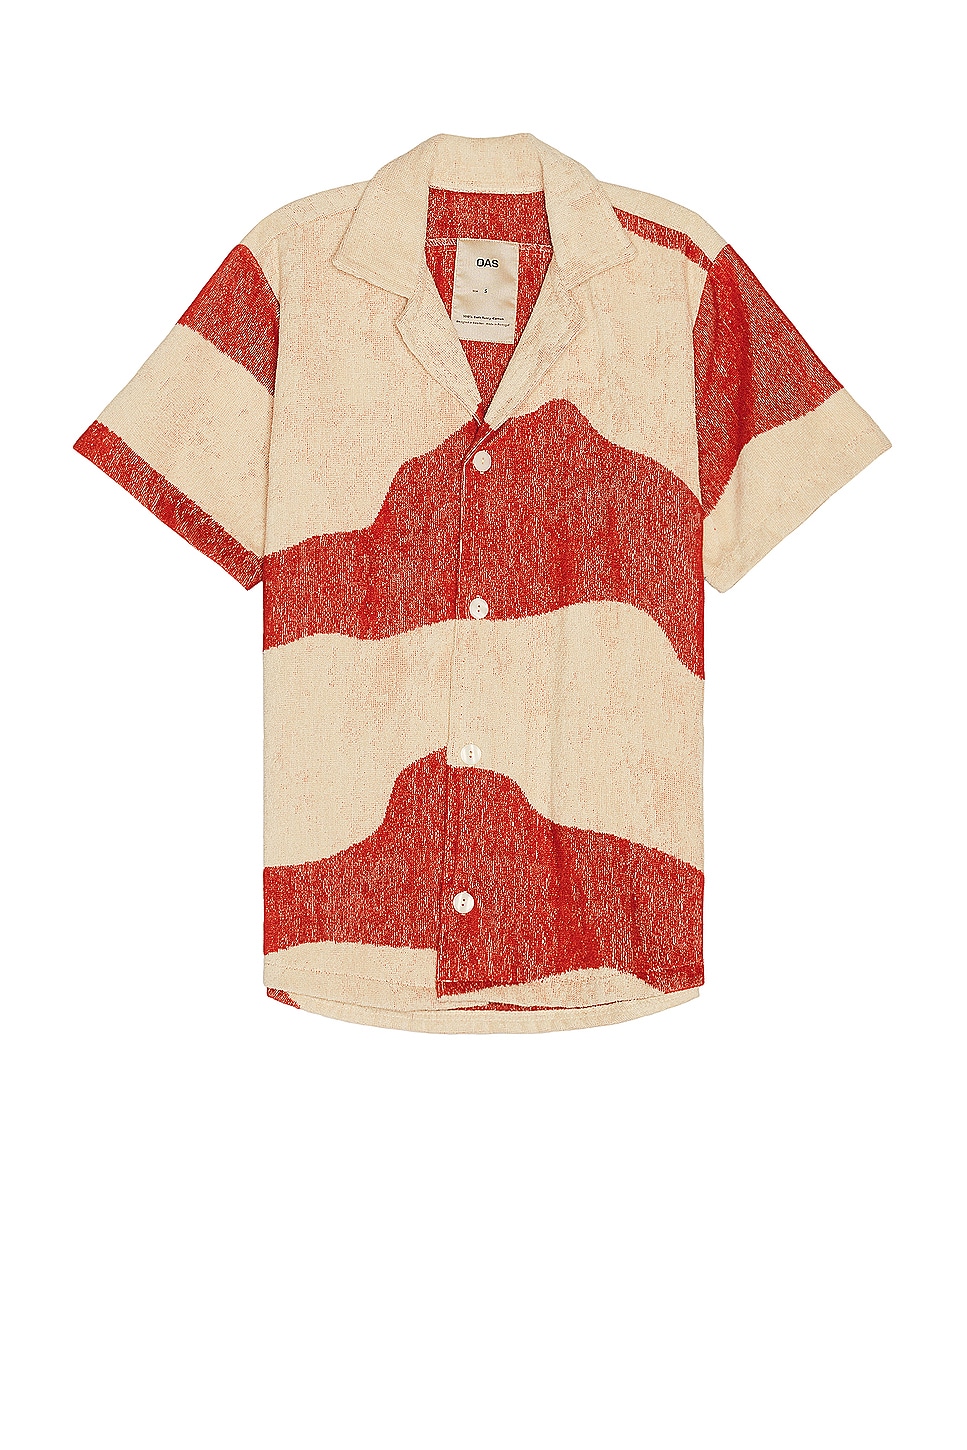 Amber Dune Cuba Terry Shirt in Red